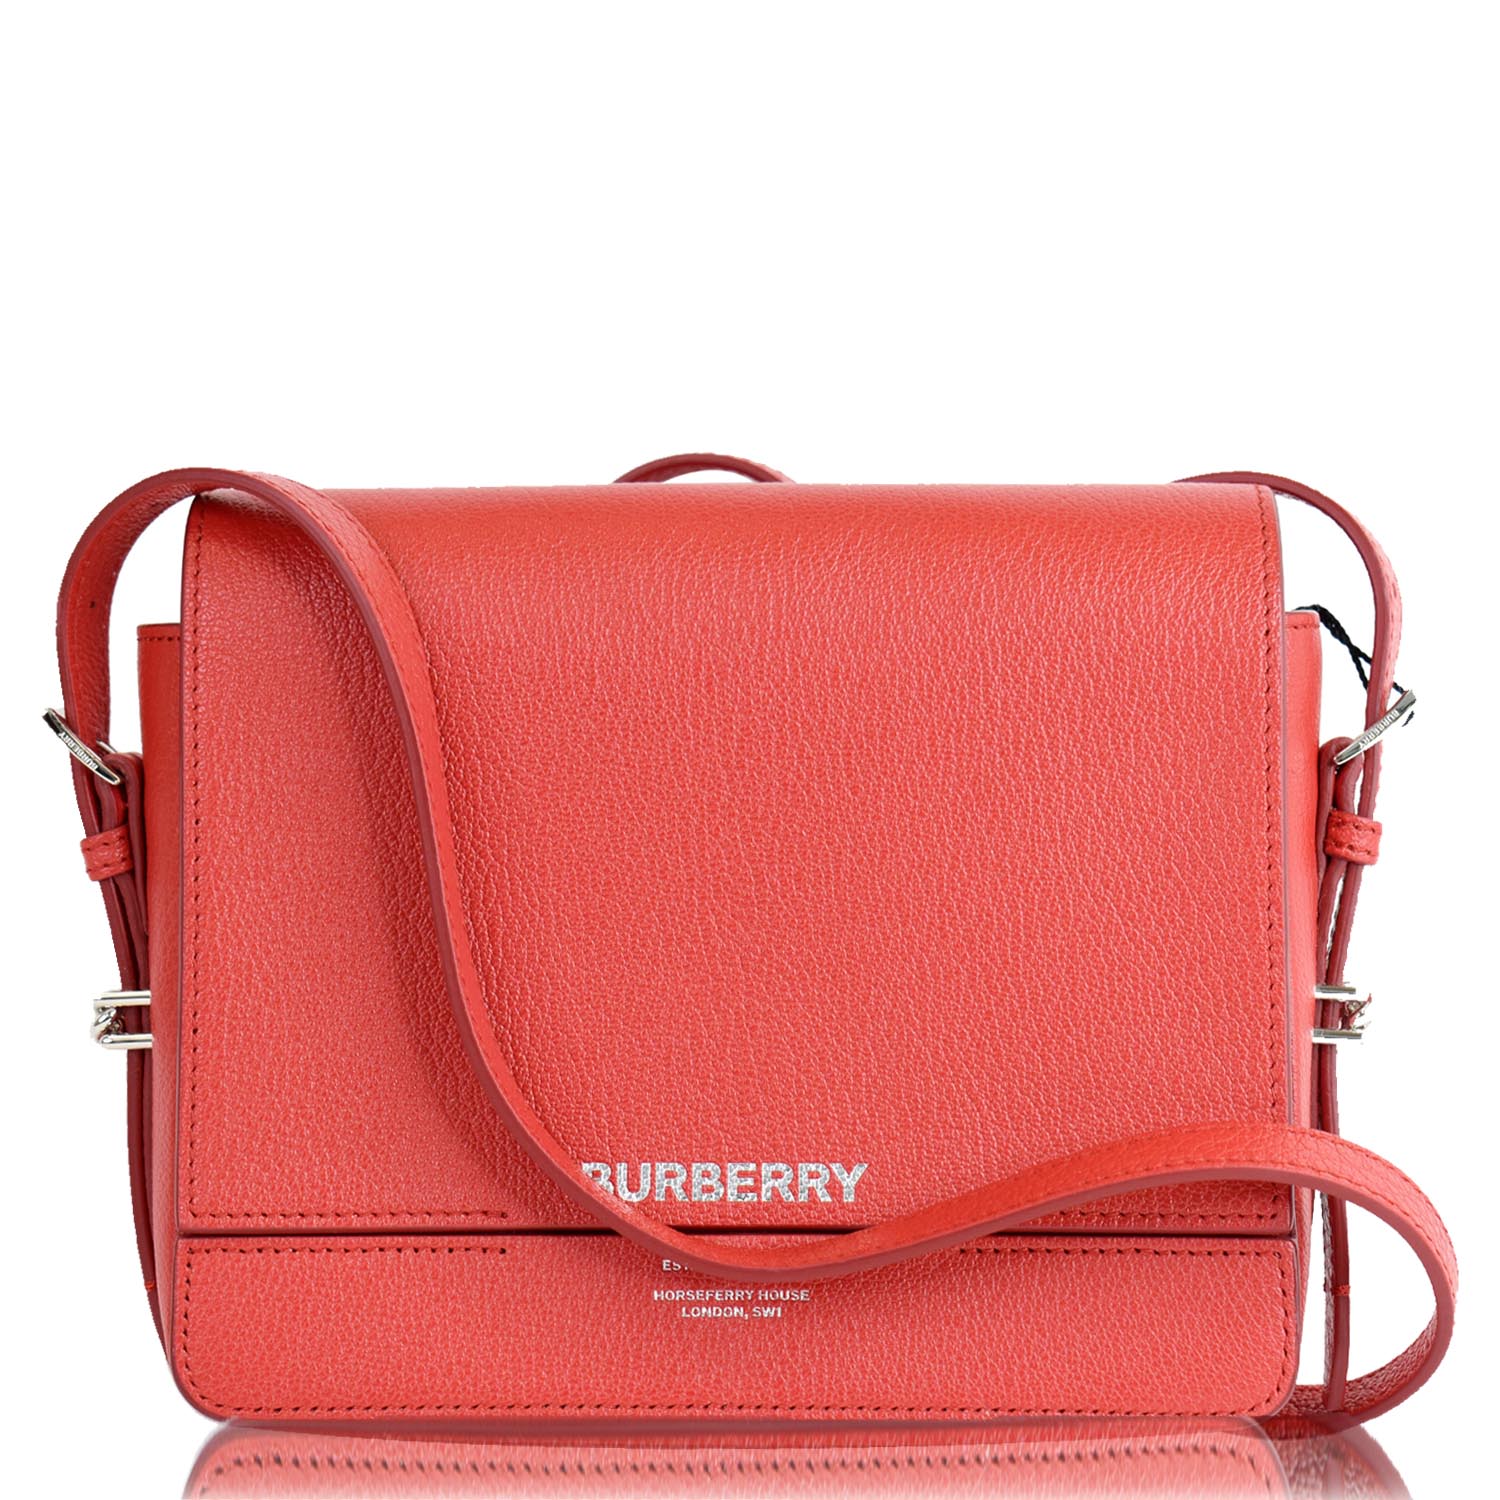 BURBERRY Small Leather Grace Bag Red Color - I-MAGAZINE Inc